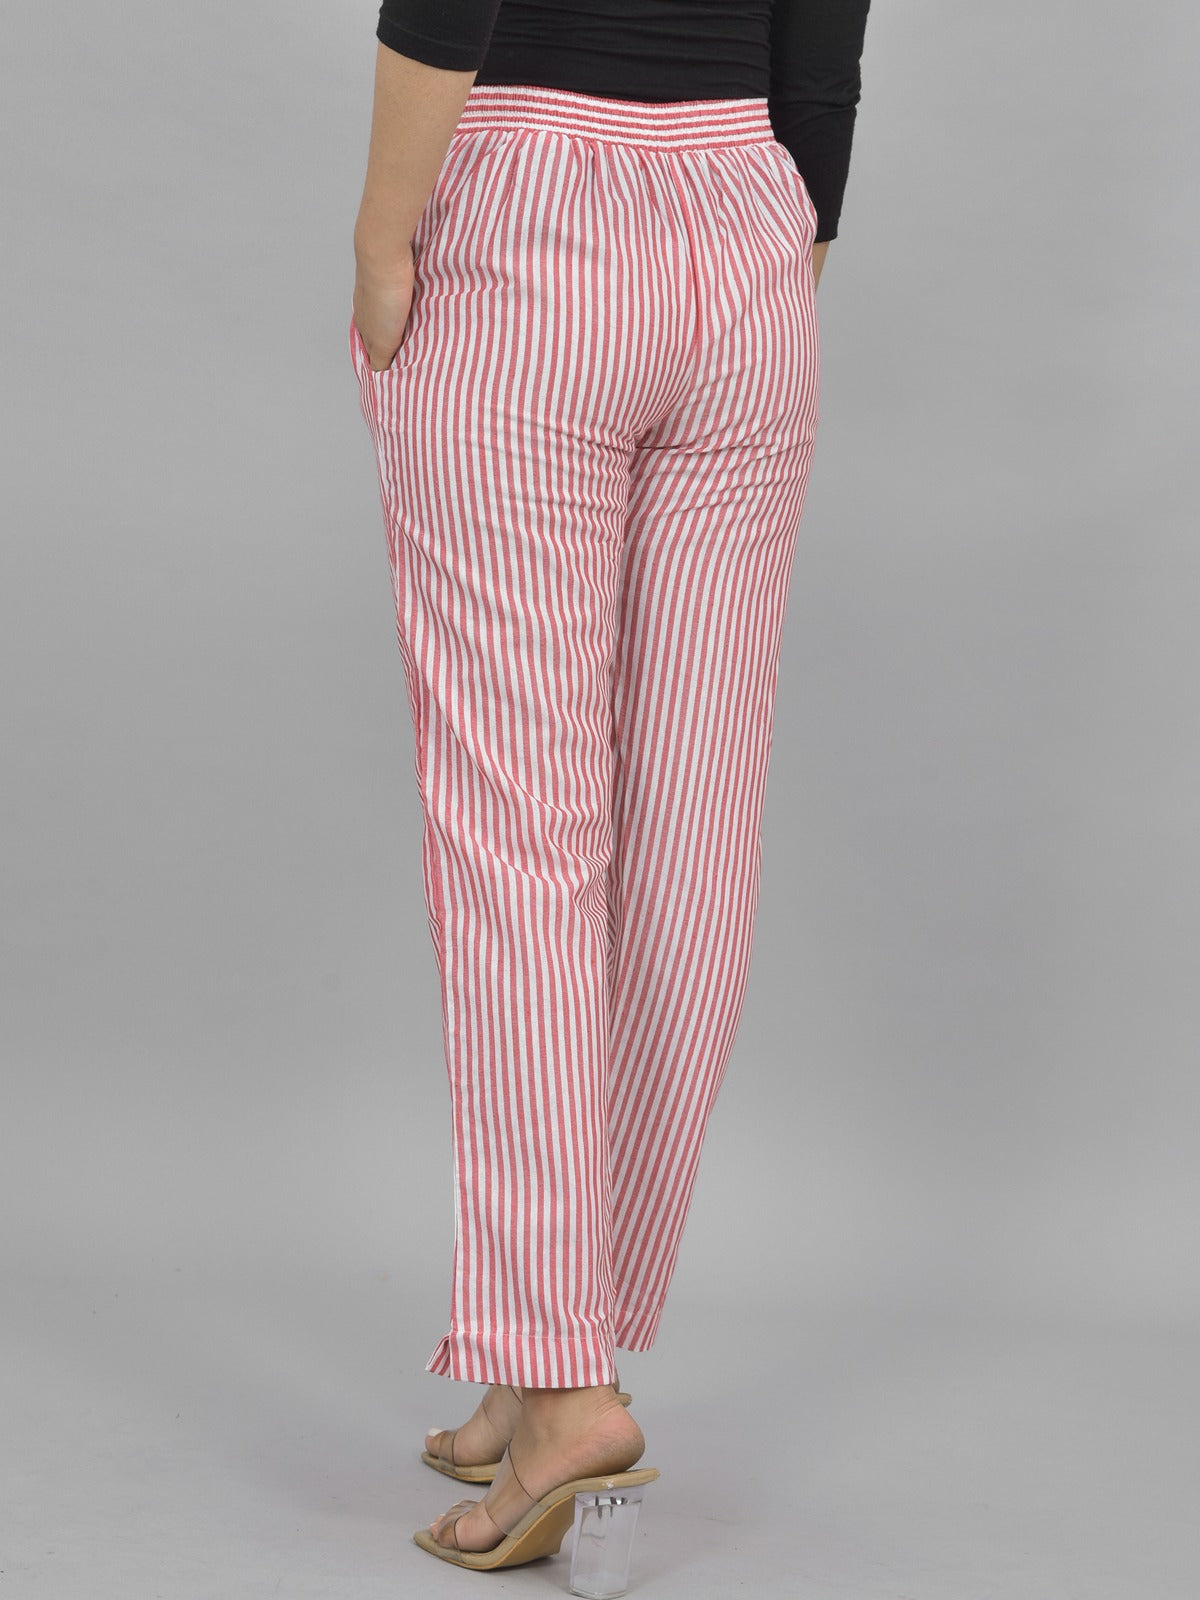 Combo Pack of 2 Womens Pink And Red Cotton Stripe Trouser